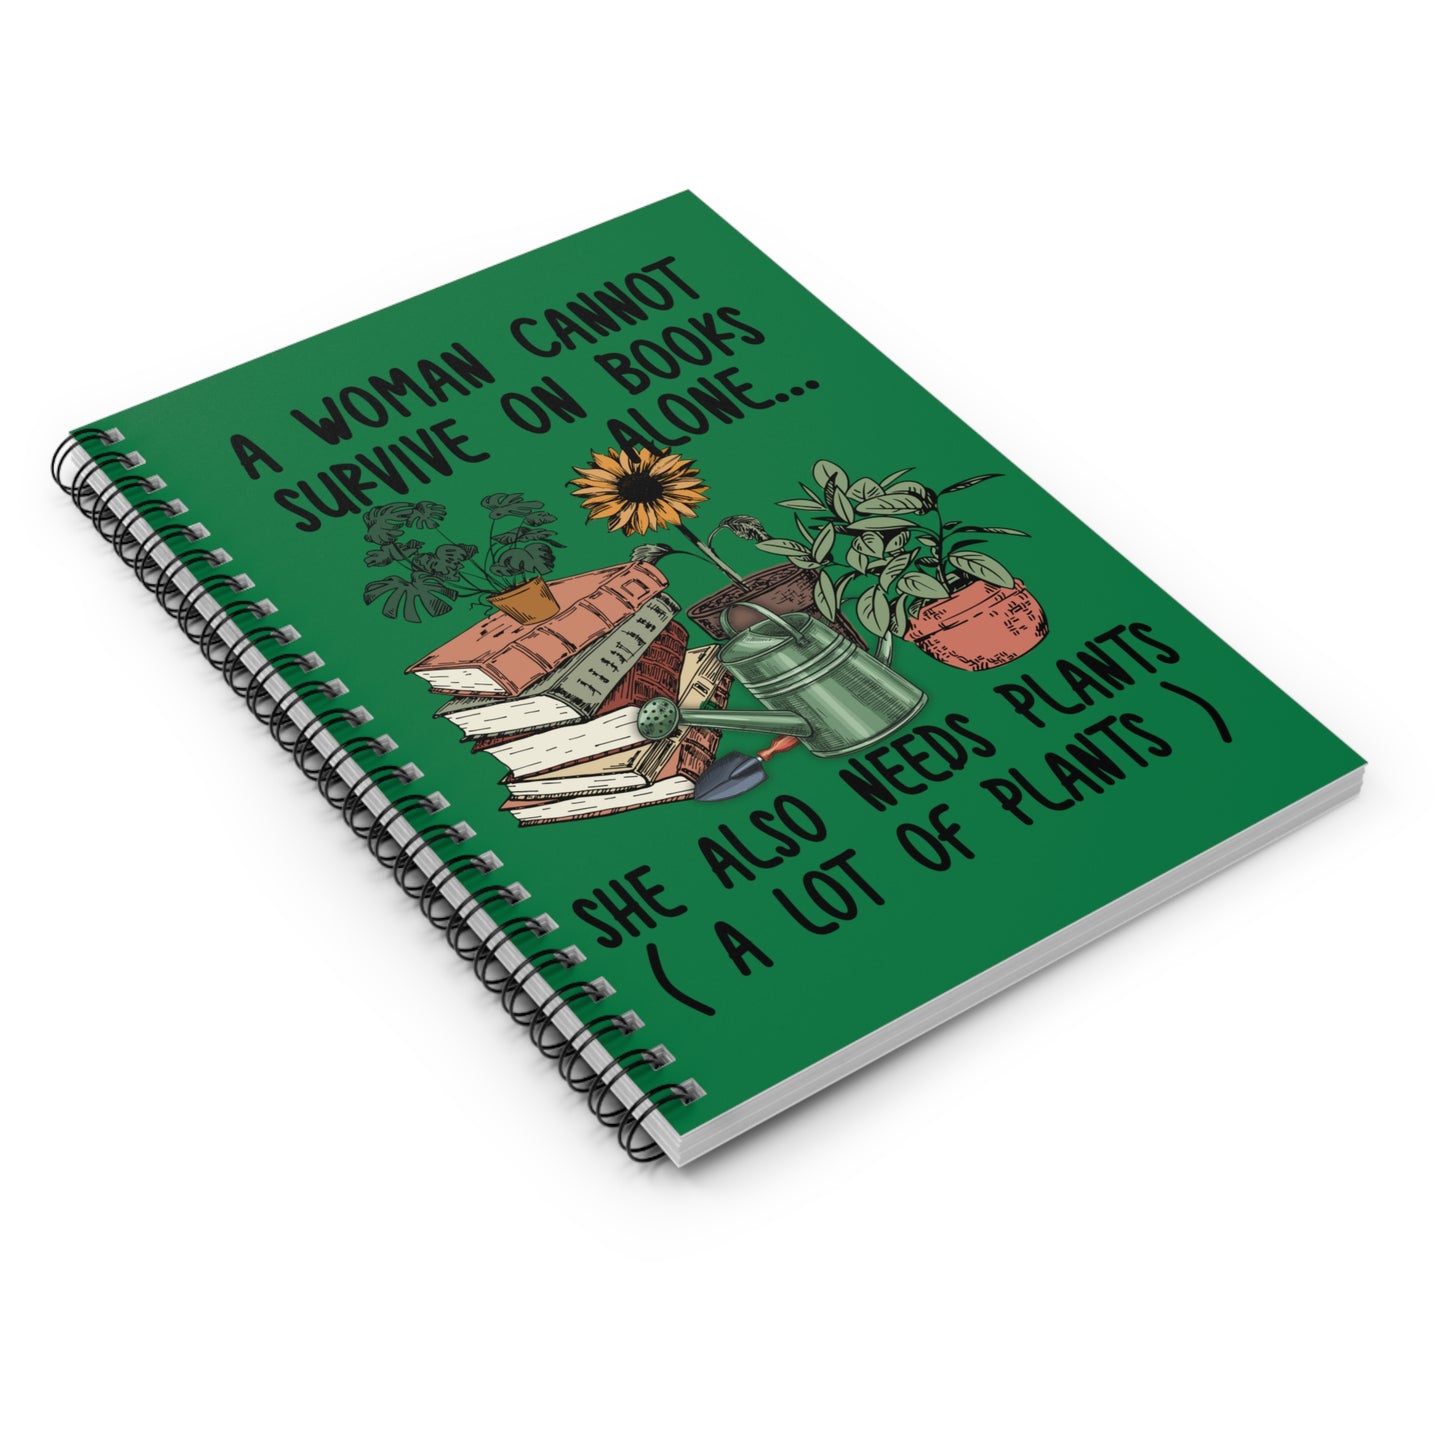 Plants Alone: Spiral Notebook - Log Books - Journals - Diaries - and More Custom Printed by TheGlassyLass.com